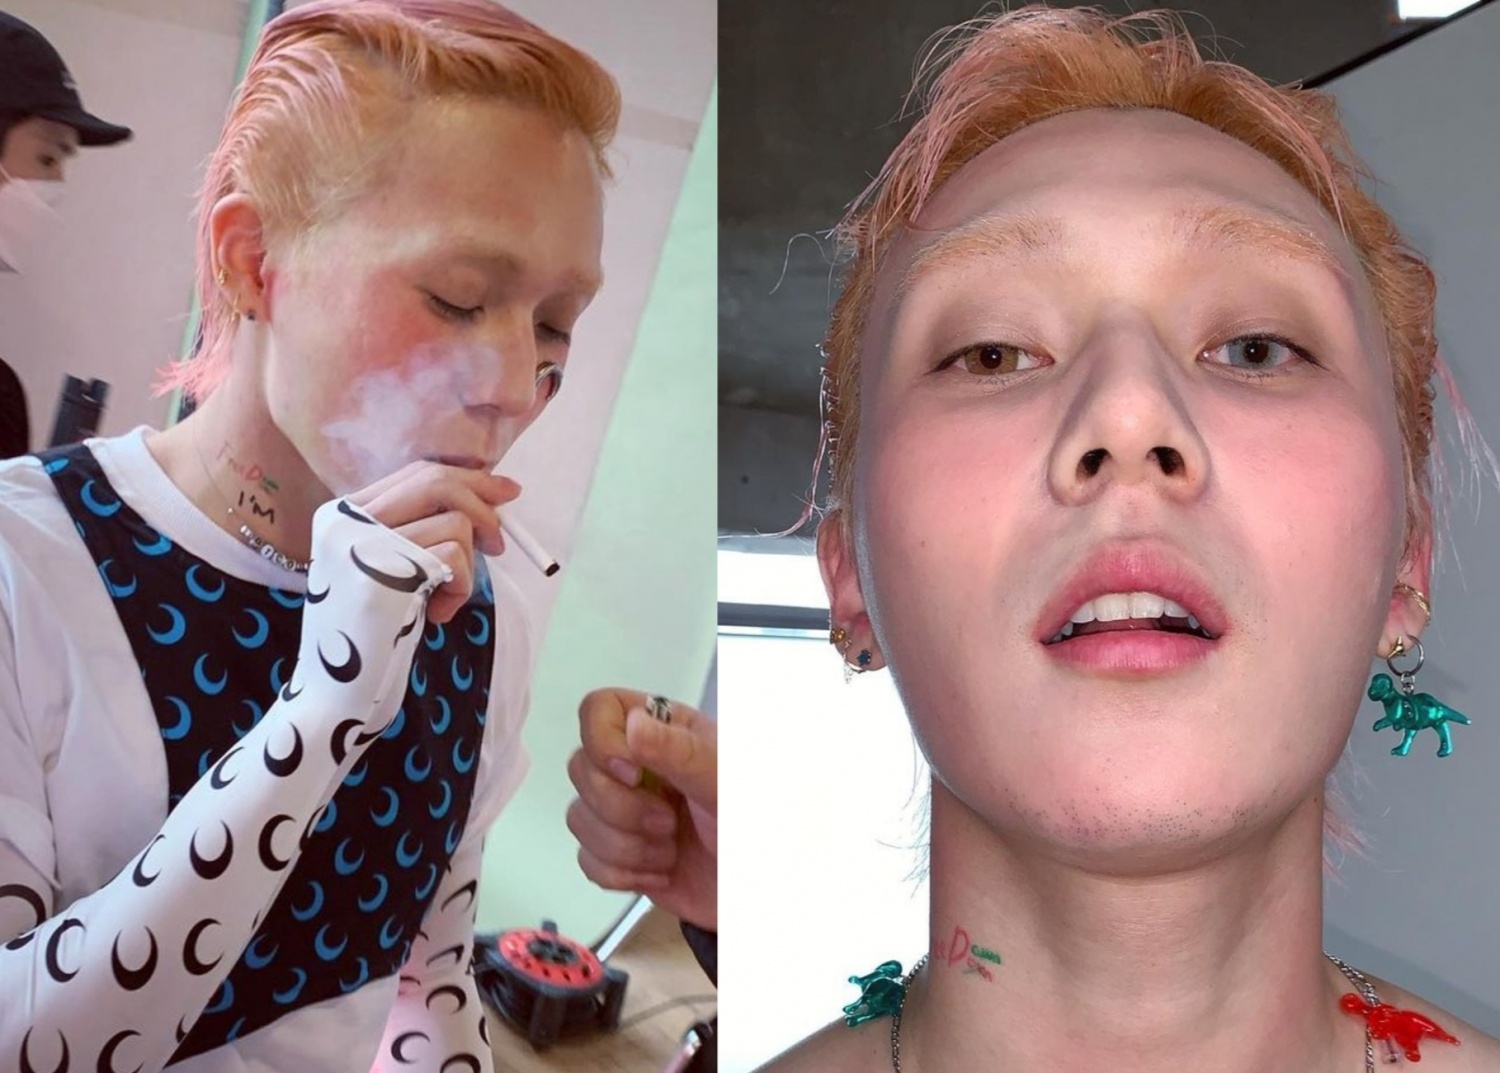 Dawn Releases Behind-The-Scenes Photos of Him Smoking for an